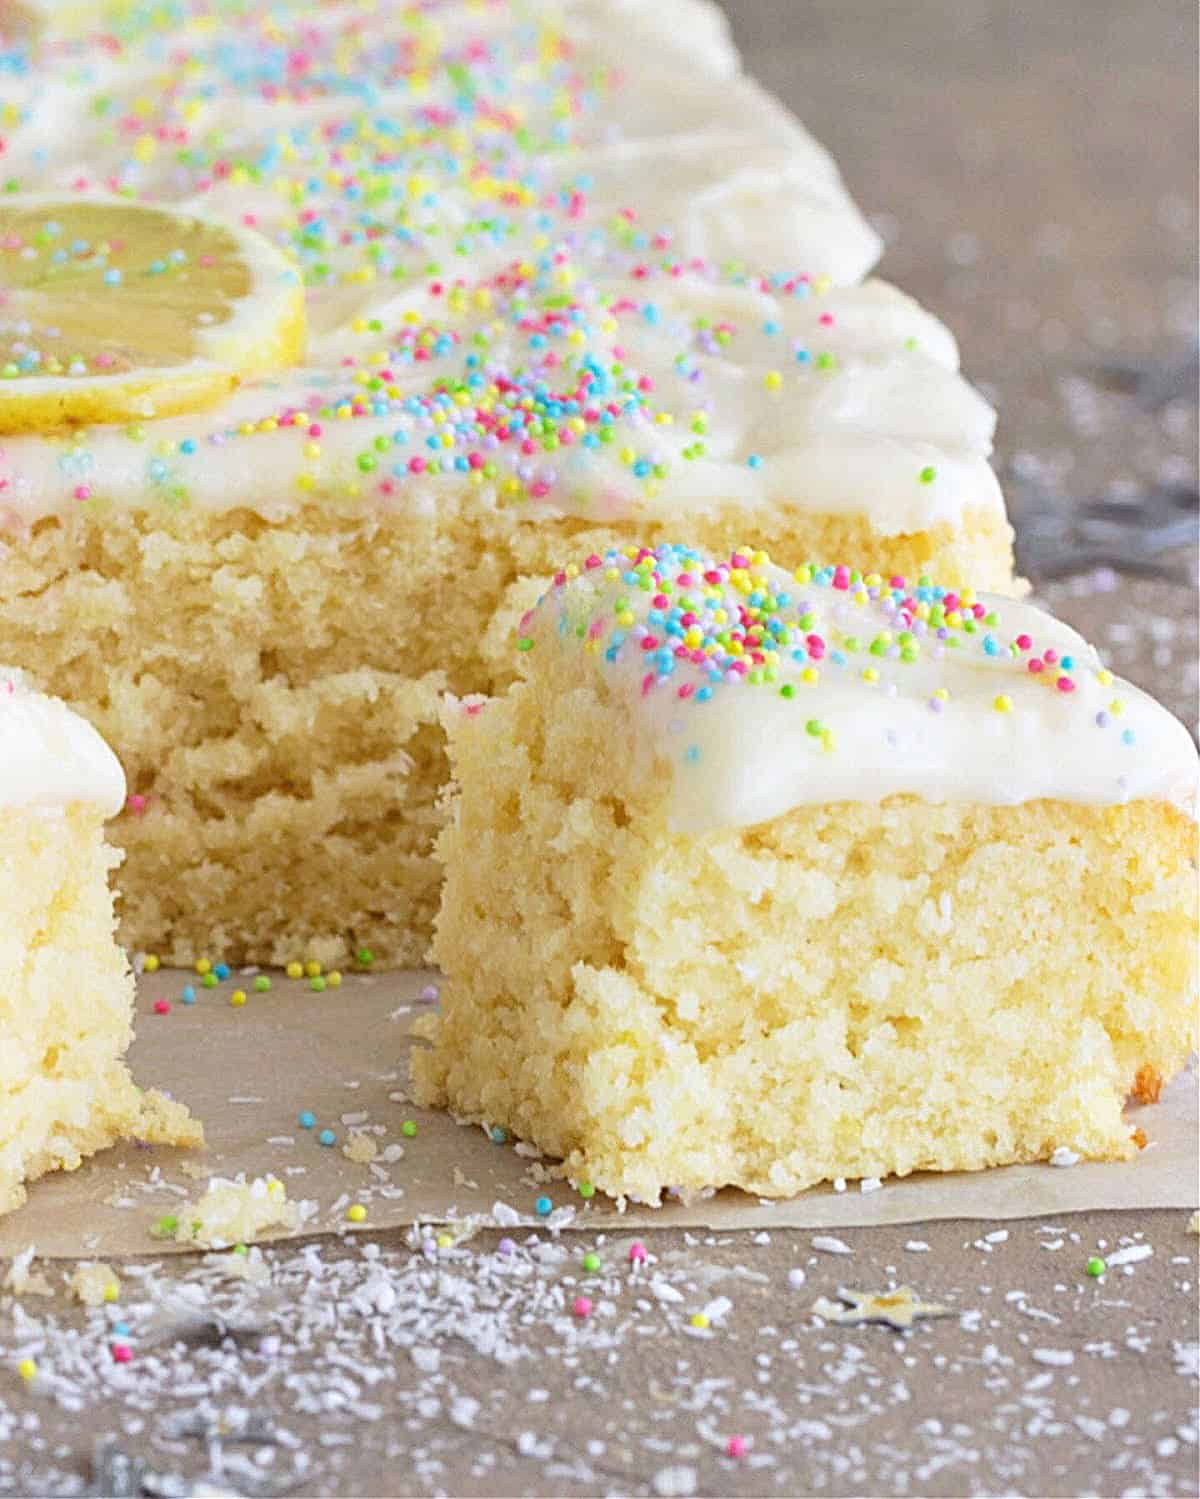 Close up of whole and cut squares of coconut cake with frosting and confetti on grey surface